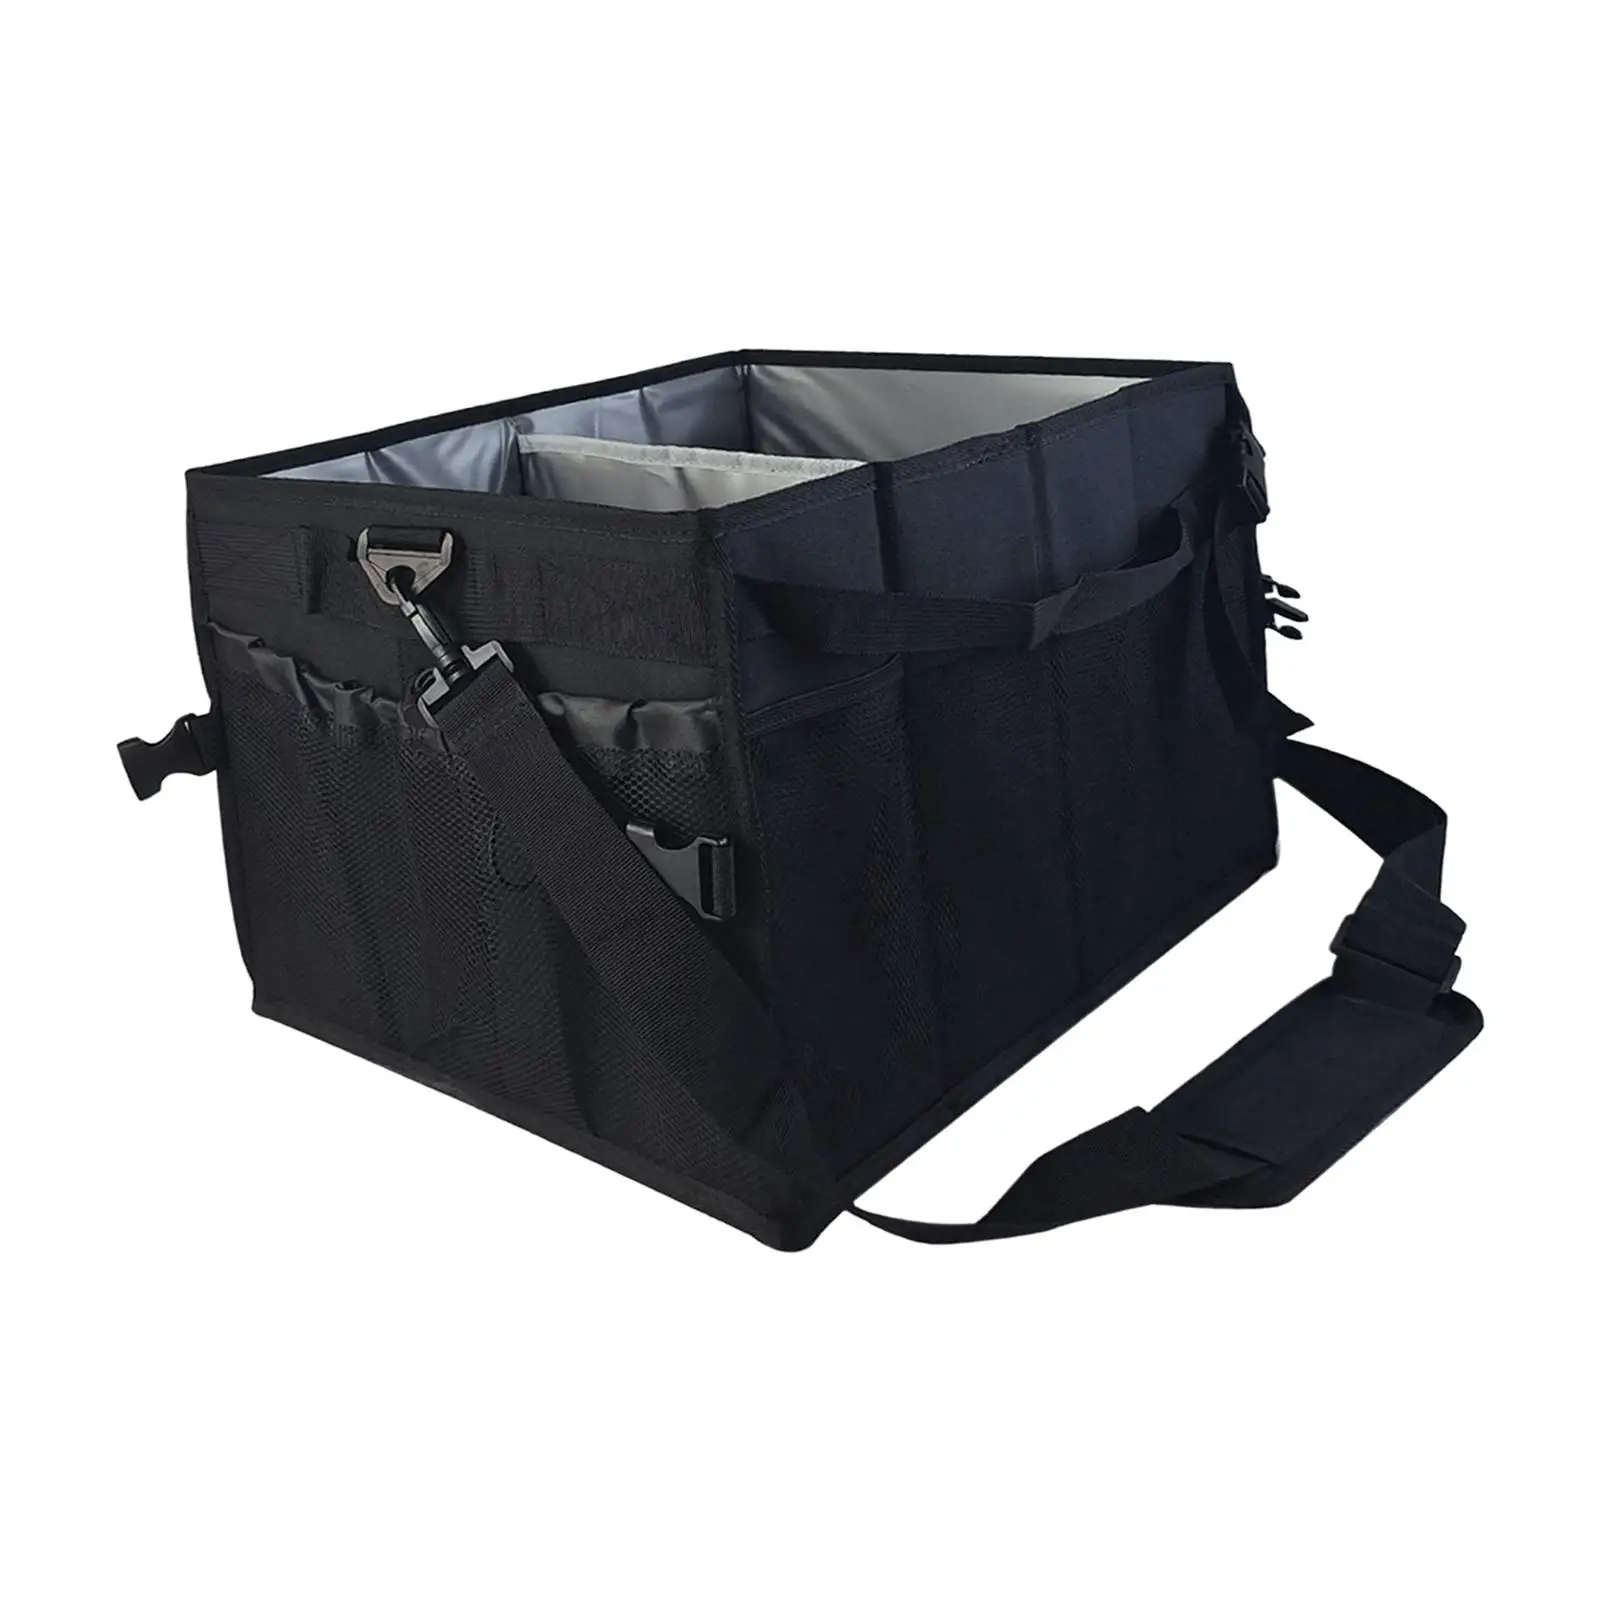 Portable BBQ Tool Storage Bag Organizer Grill Tool Carrying Bag Barbecue